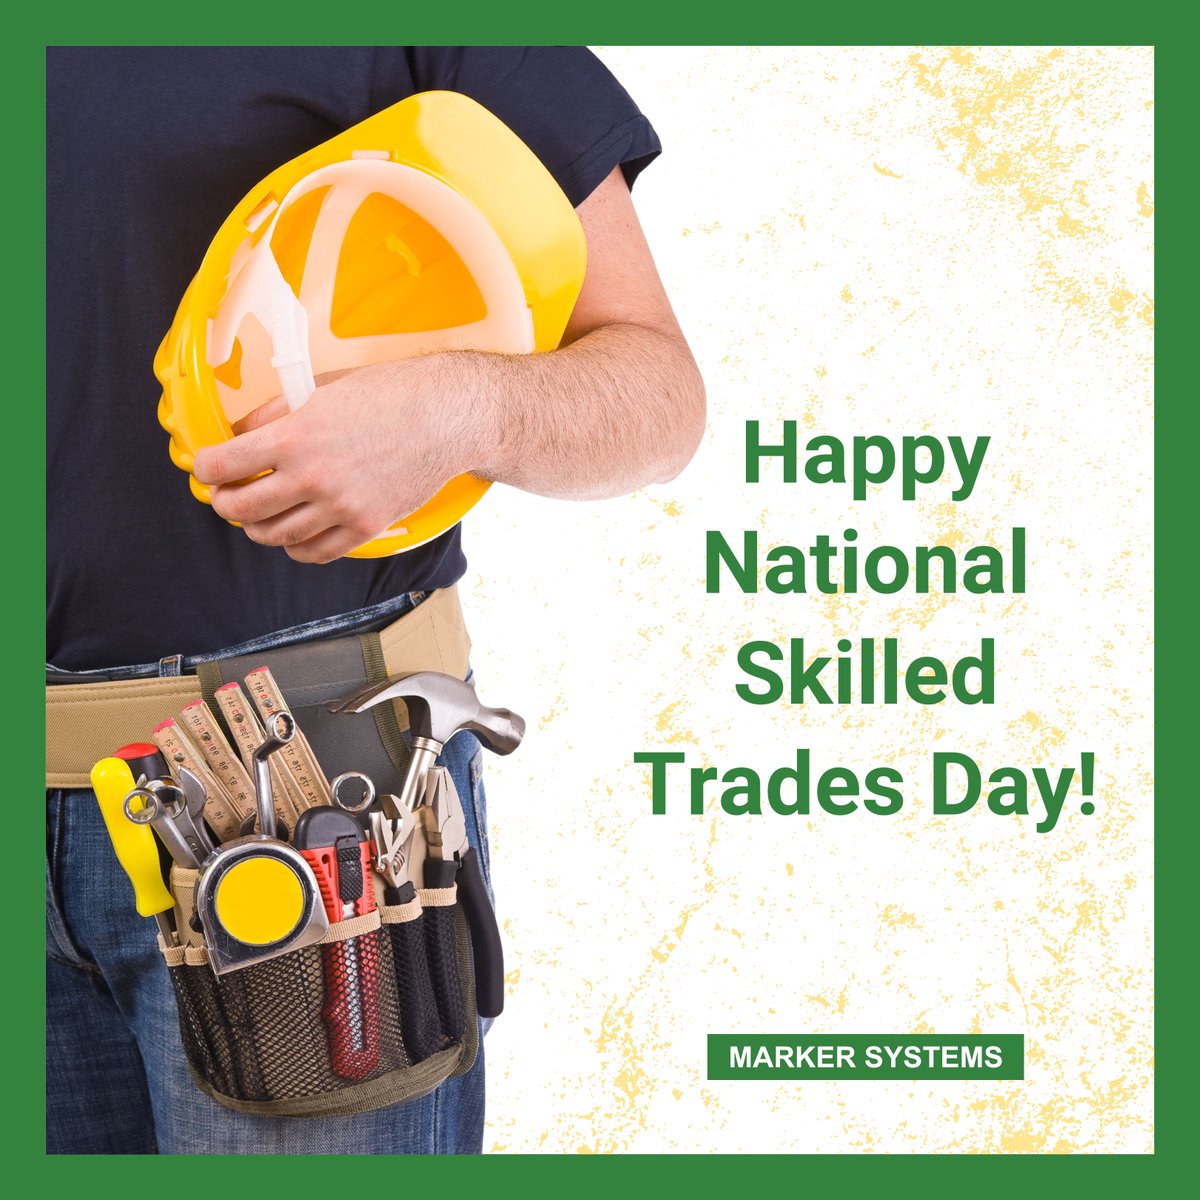 Today at @marker_systems we acknowledge the masters of craftsmanship, the backbone of innovation! Happy National Skilled Trades Day to all those who build, repair, and shape our world with their expertise. 🛠️
 
#SkilledTradesDay #Manufacturing #TradeProfessionals